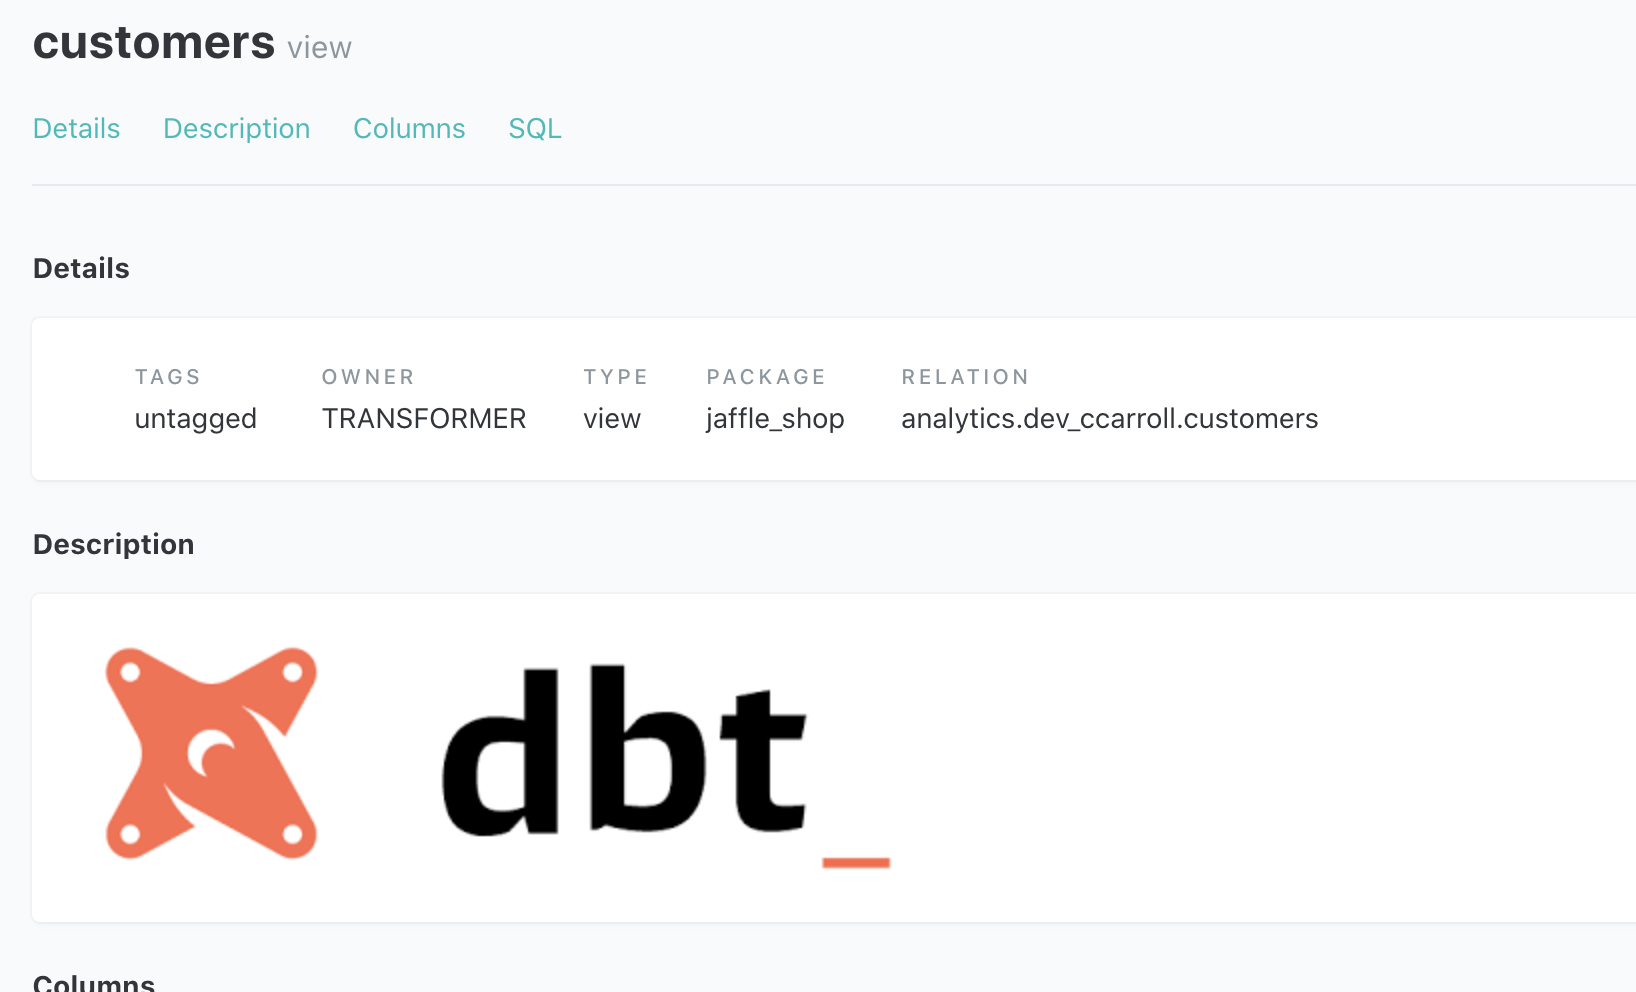 The image at assets/dbt-logo.png is rendered correctly